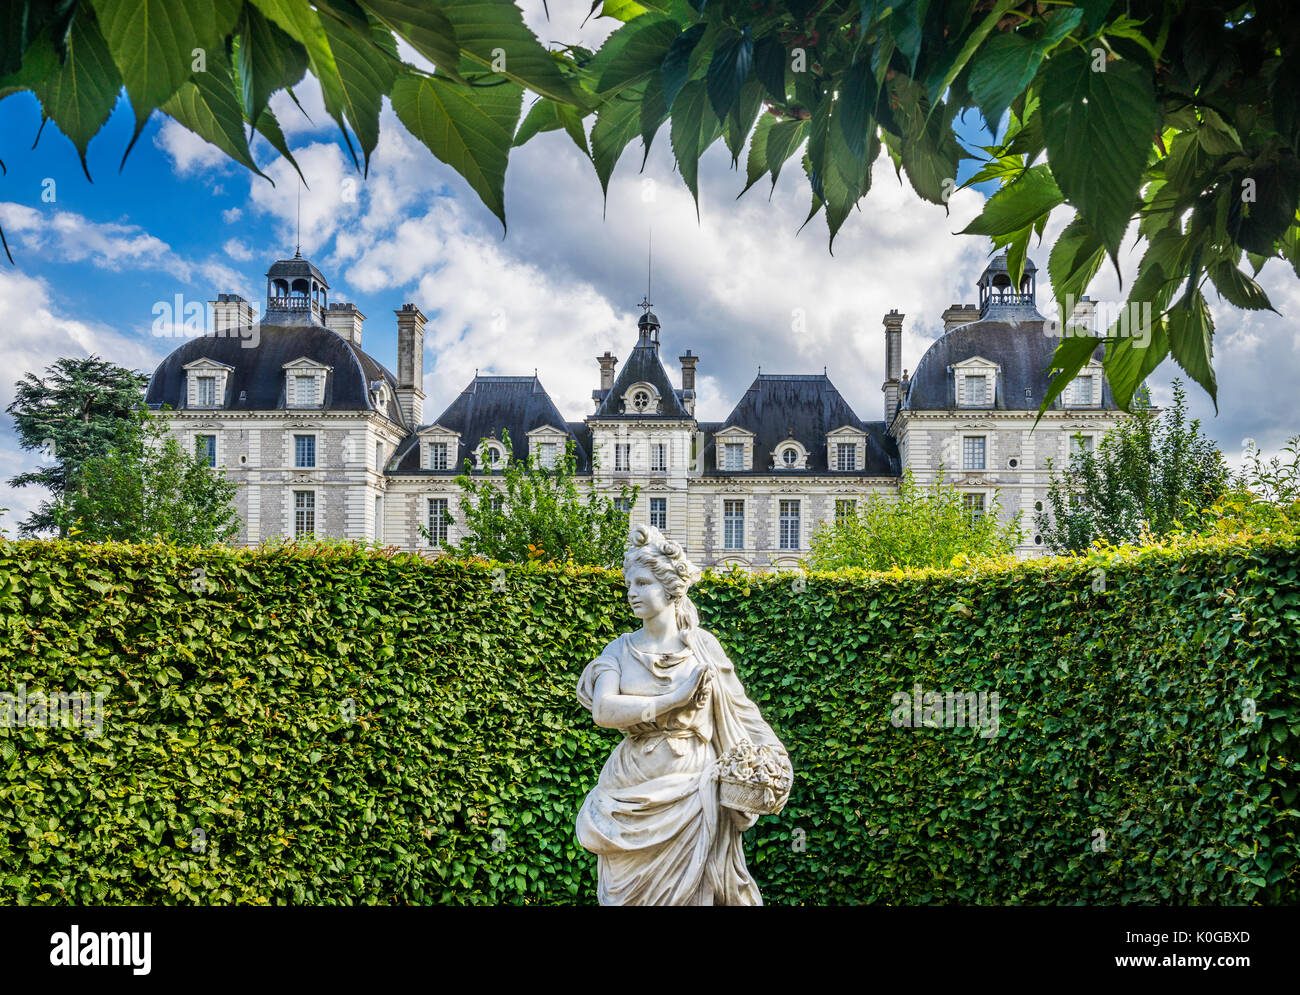 France, Loir-et-Cher department, the Louis XIII style north facade of Château de Cheverny from the gardens Stock Photo